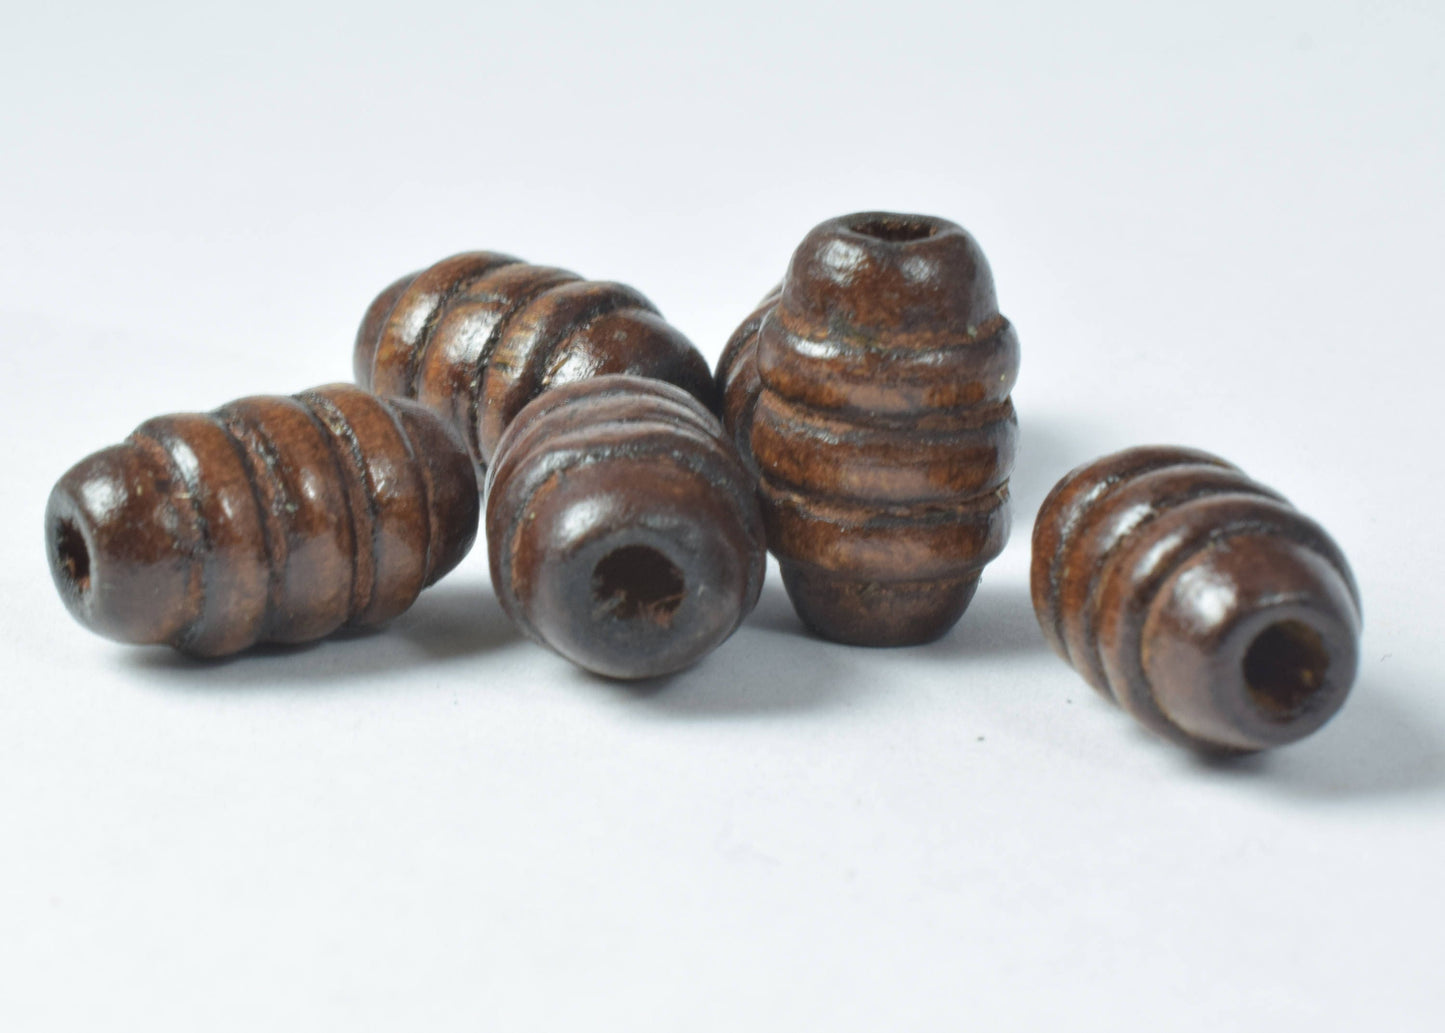 9x14mm Groove Barrel Tube Brown Wooden Beads, Wooden Beading Tools, Brown Wood Beads, Macrame Beads, Round Wooden Beads, DIY